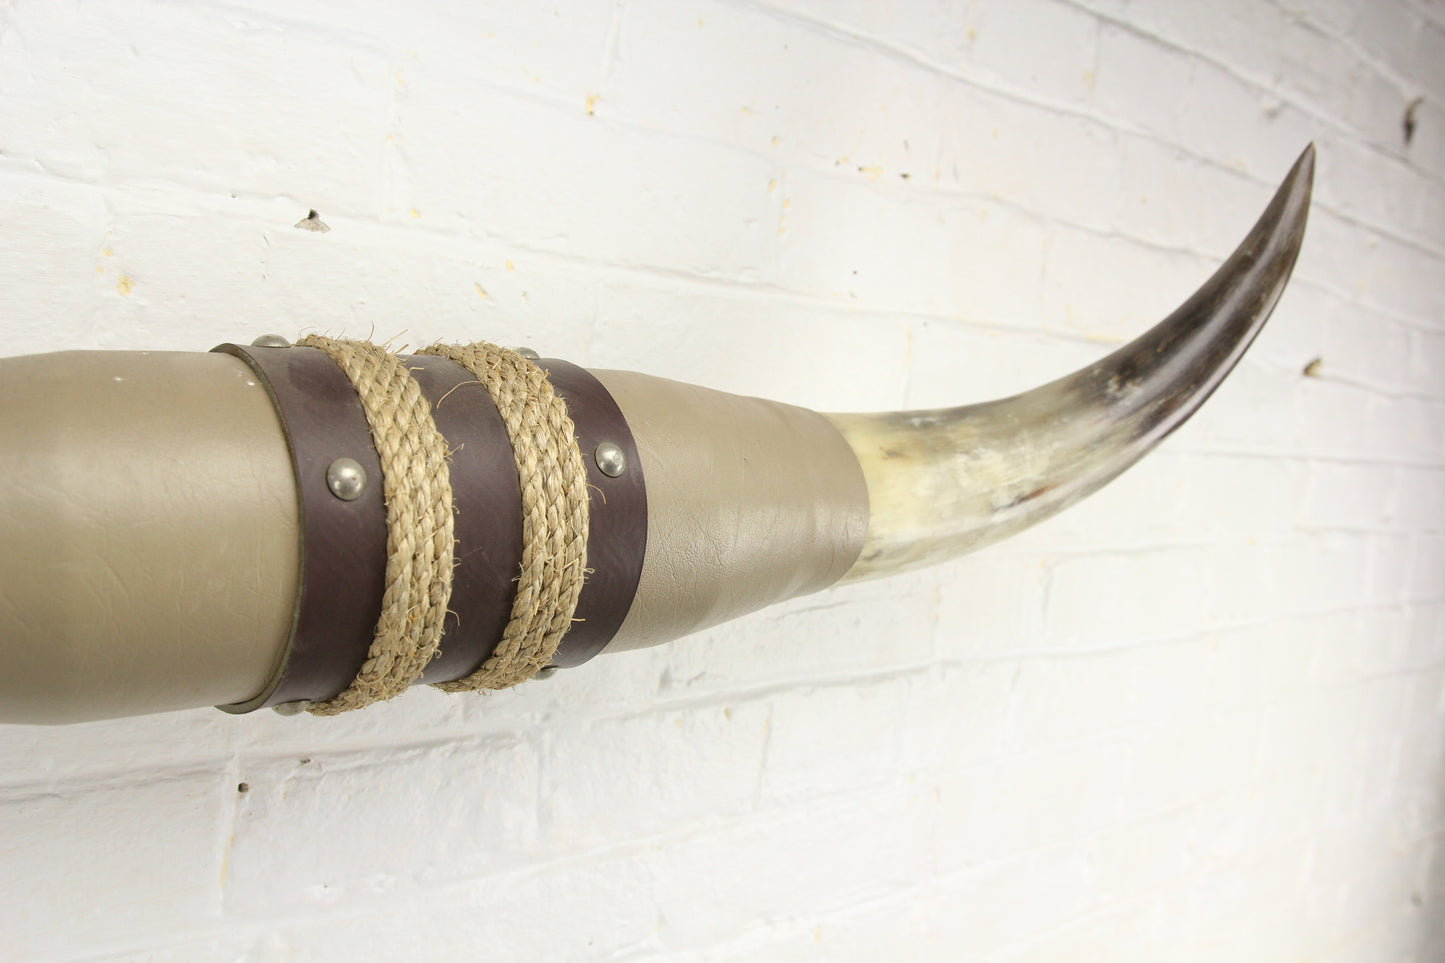 Vintage Bull Horn Taxidermy Mount with Rope, Leather, and Wood Adornments - 30" Span